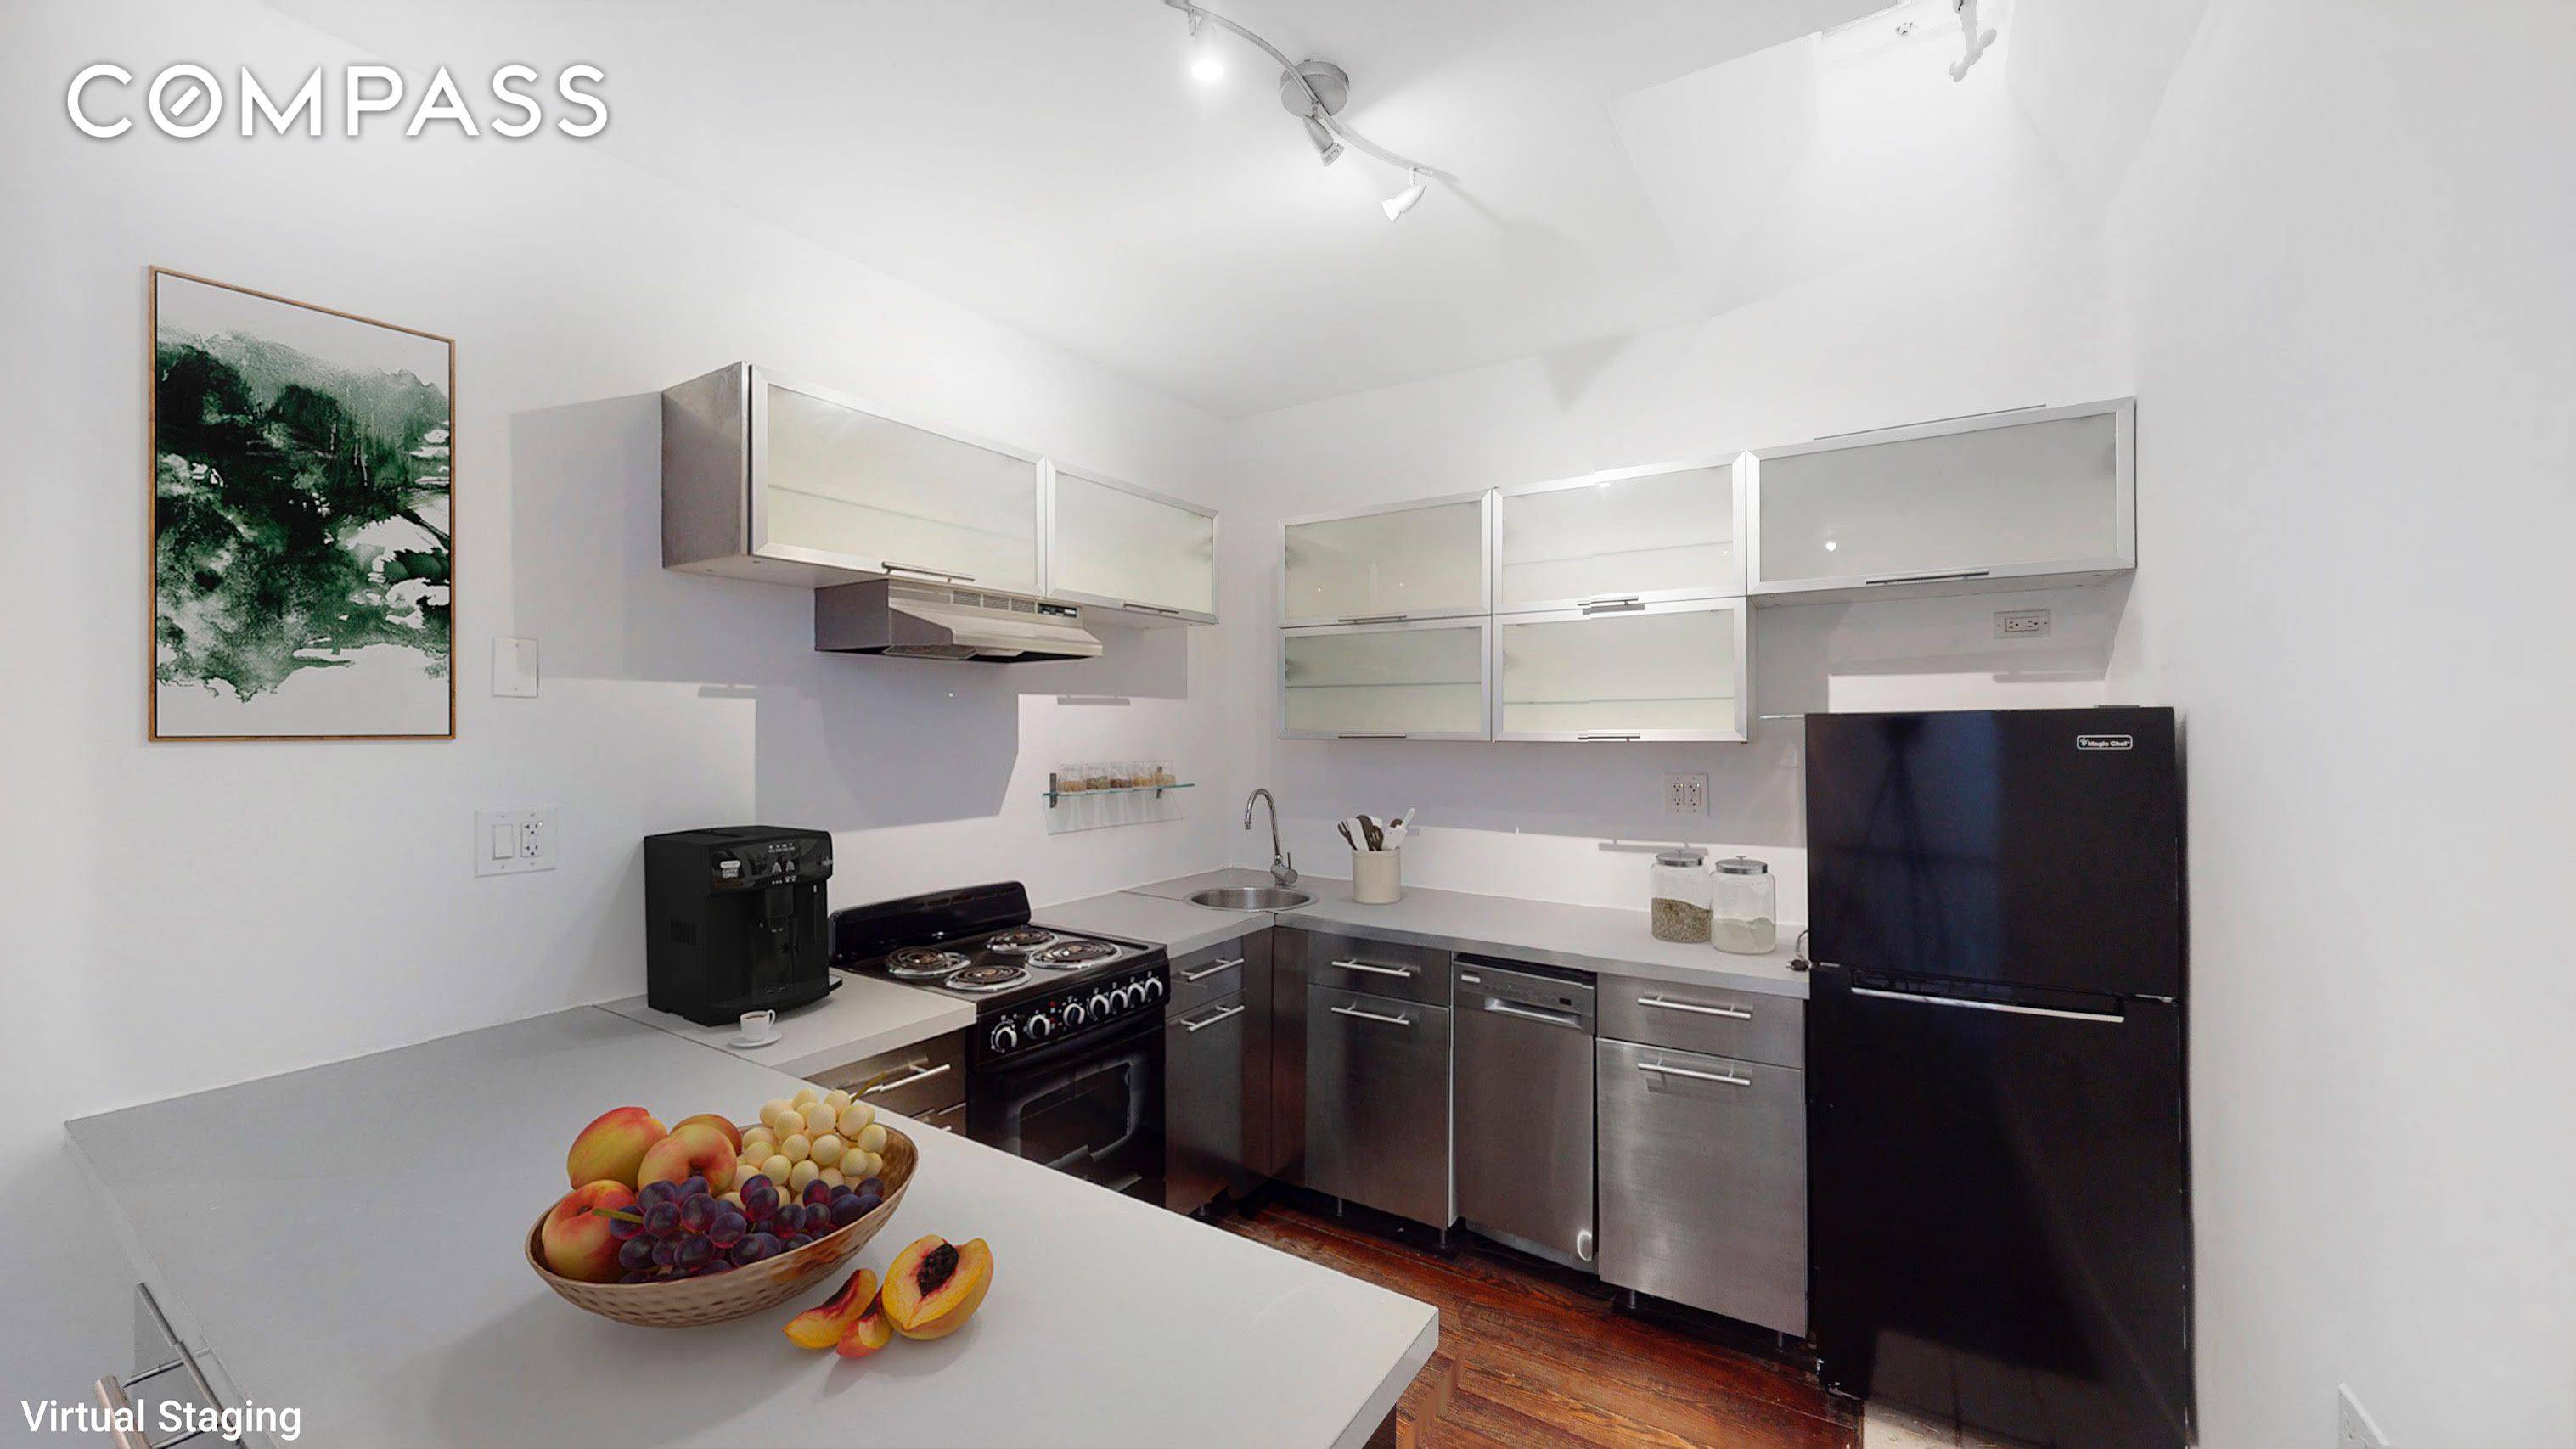 Showing by appointment only thru the listing agent and not Street Easy THE BEST INVESTMENT PROPERTY IN WASHINGTON HEIGHTS One can enjoy this income producing 6 bedroom, 3 full bathrooms, ...